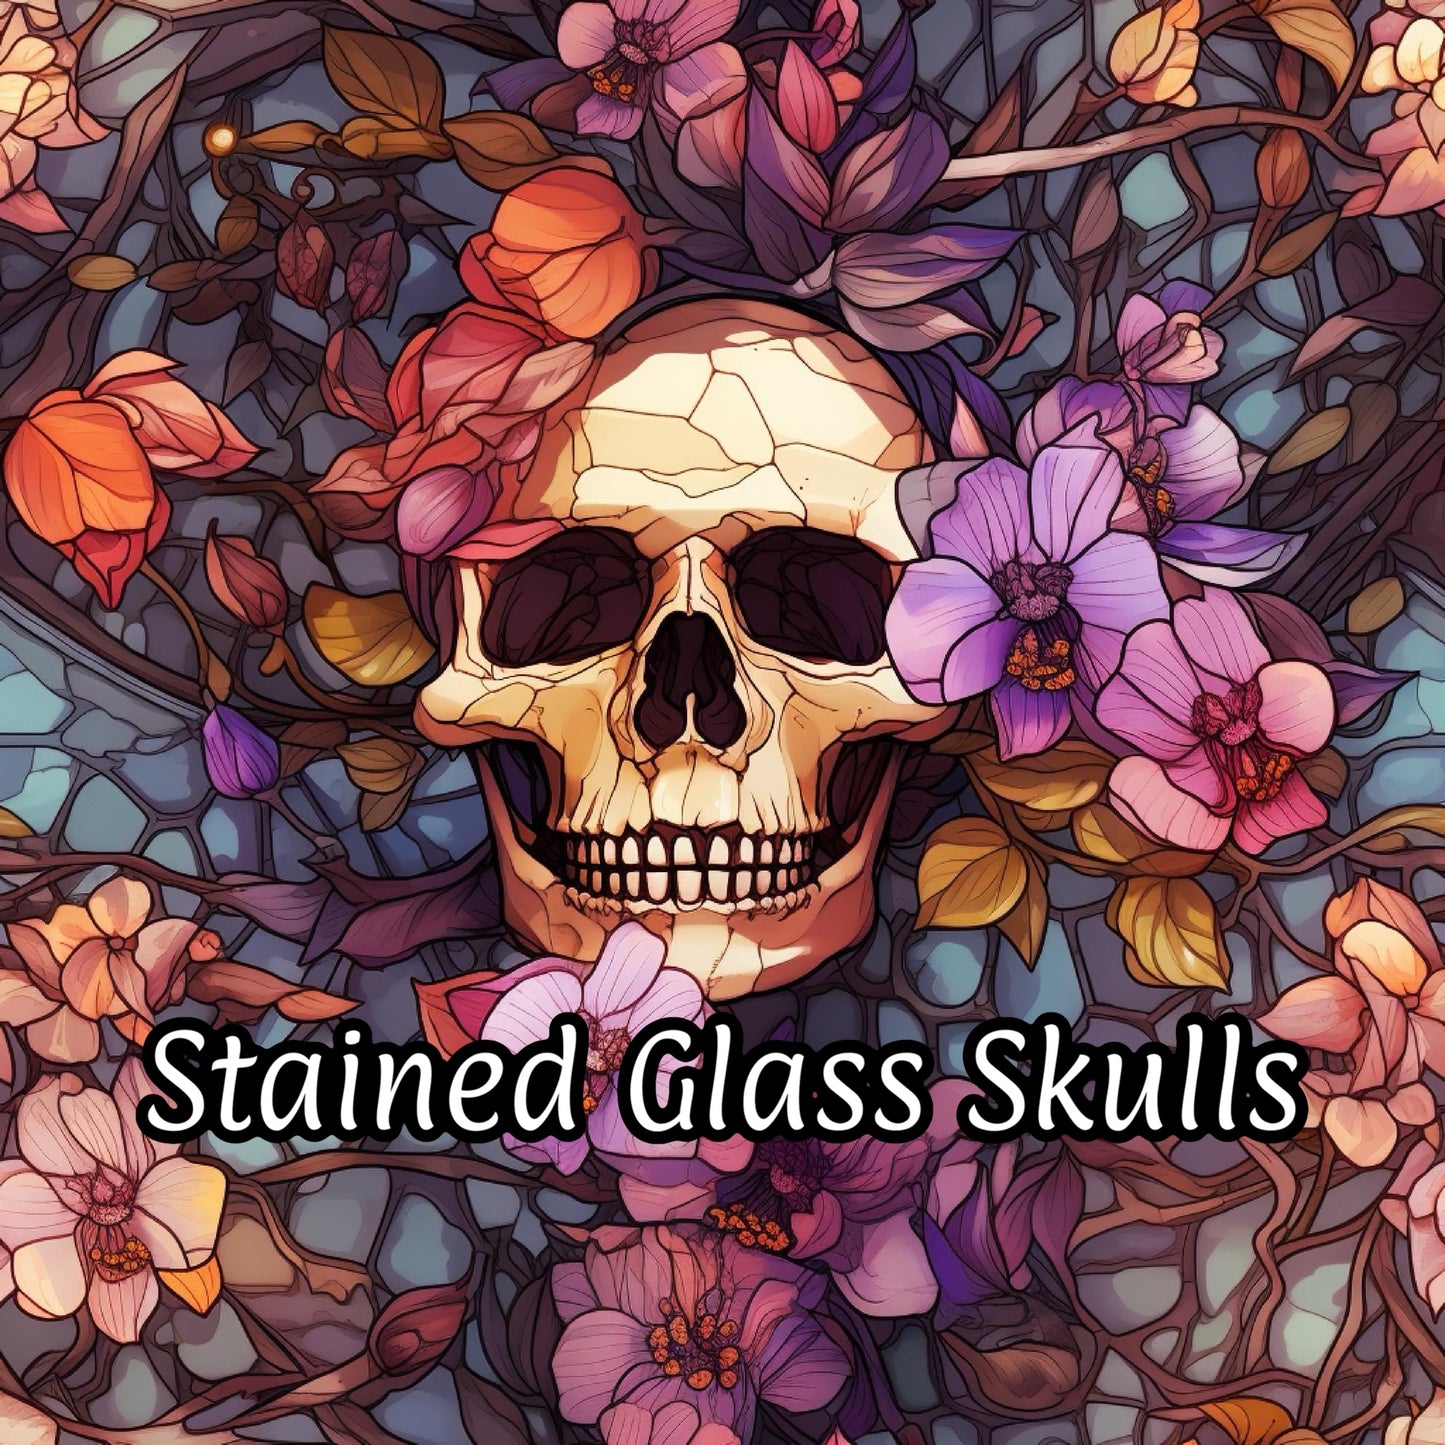 STAINED GLASS SKULLS